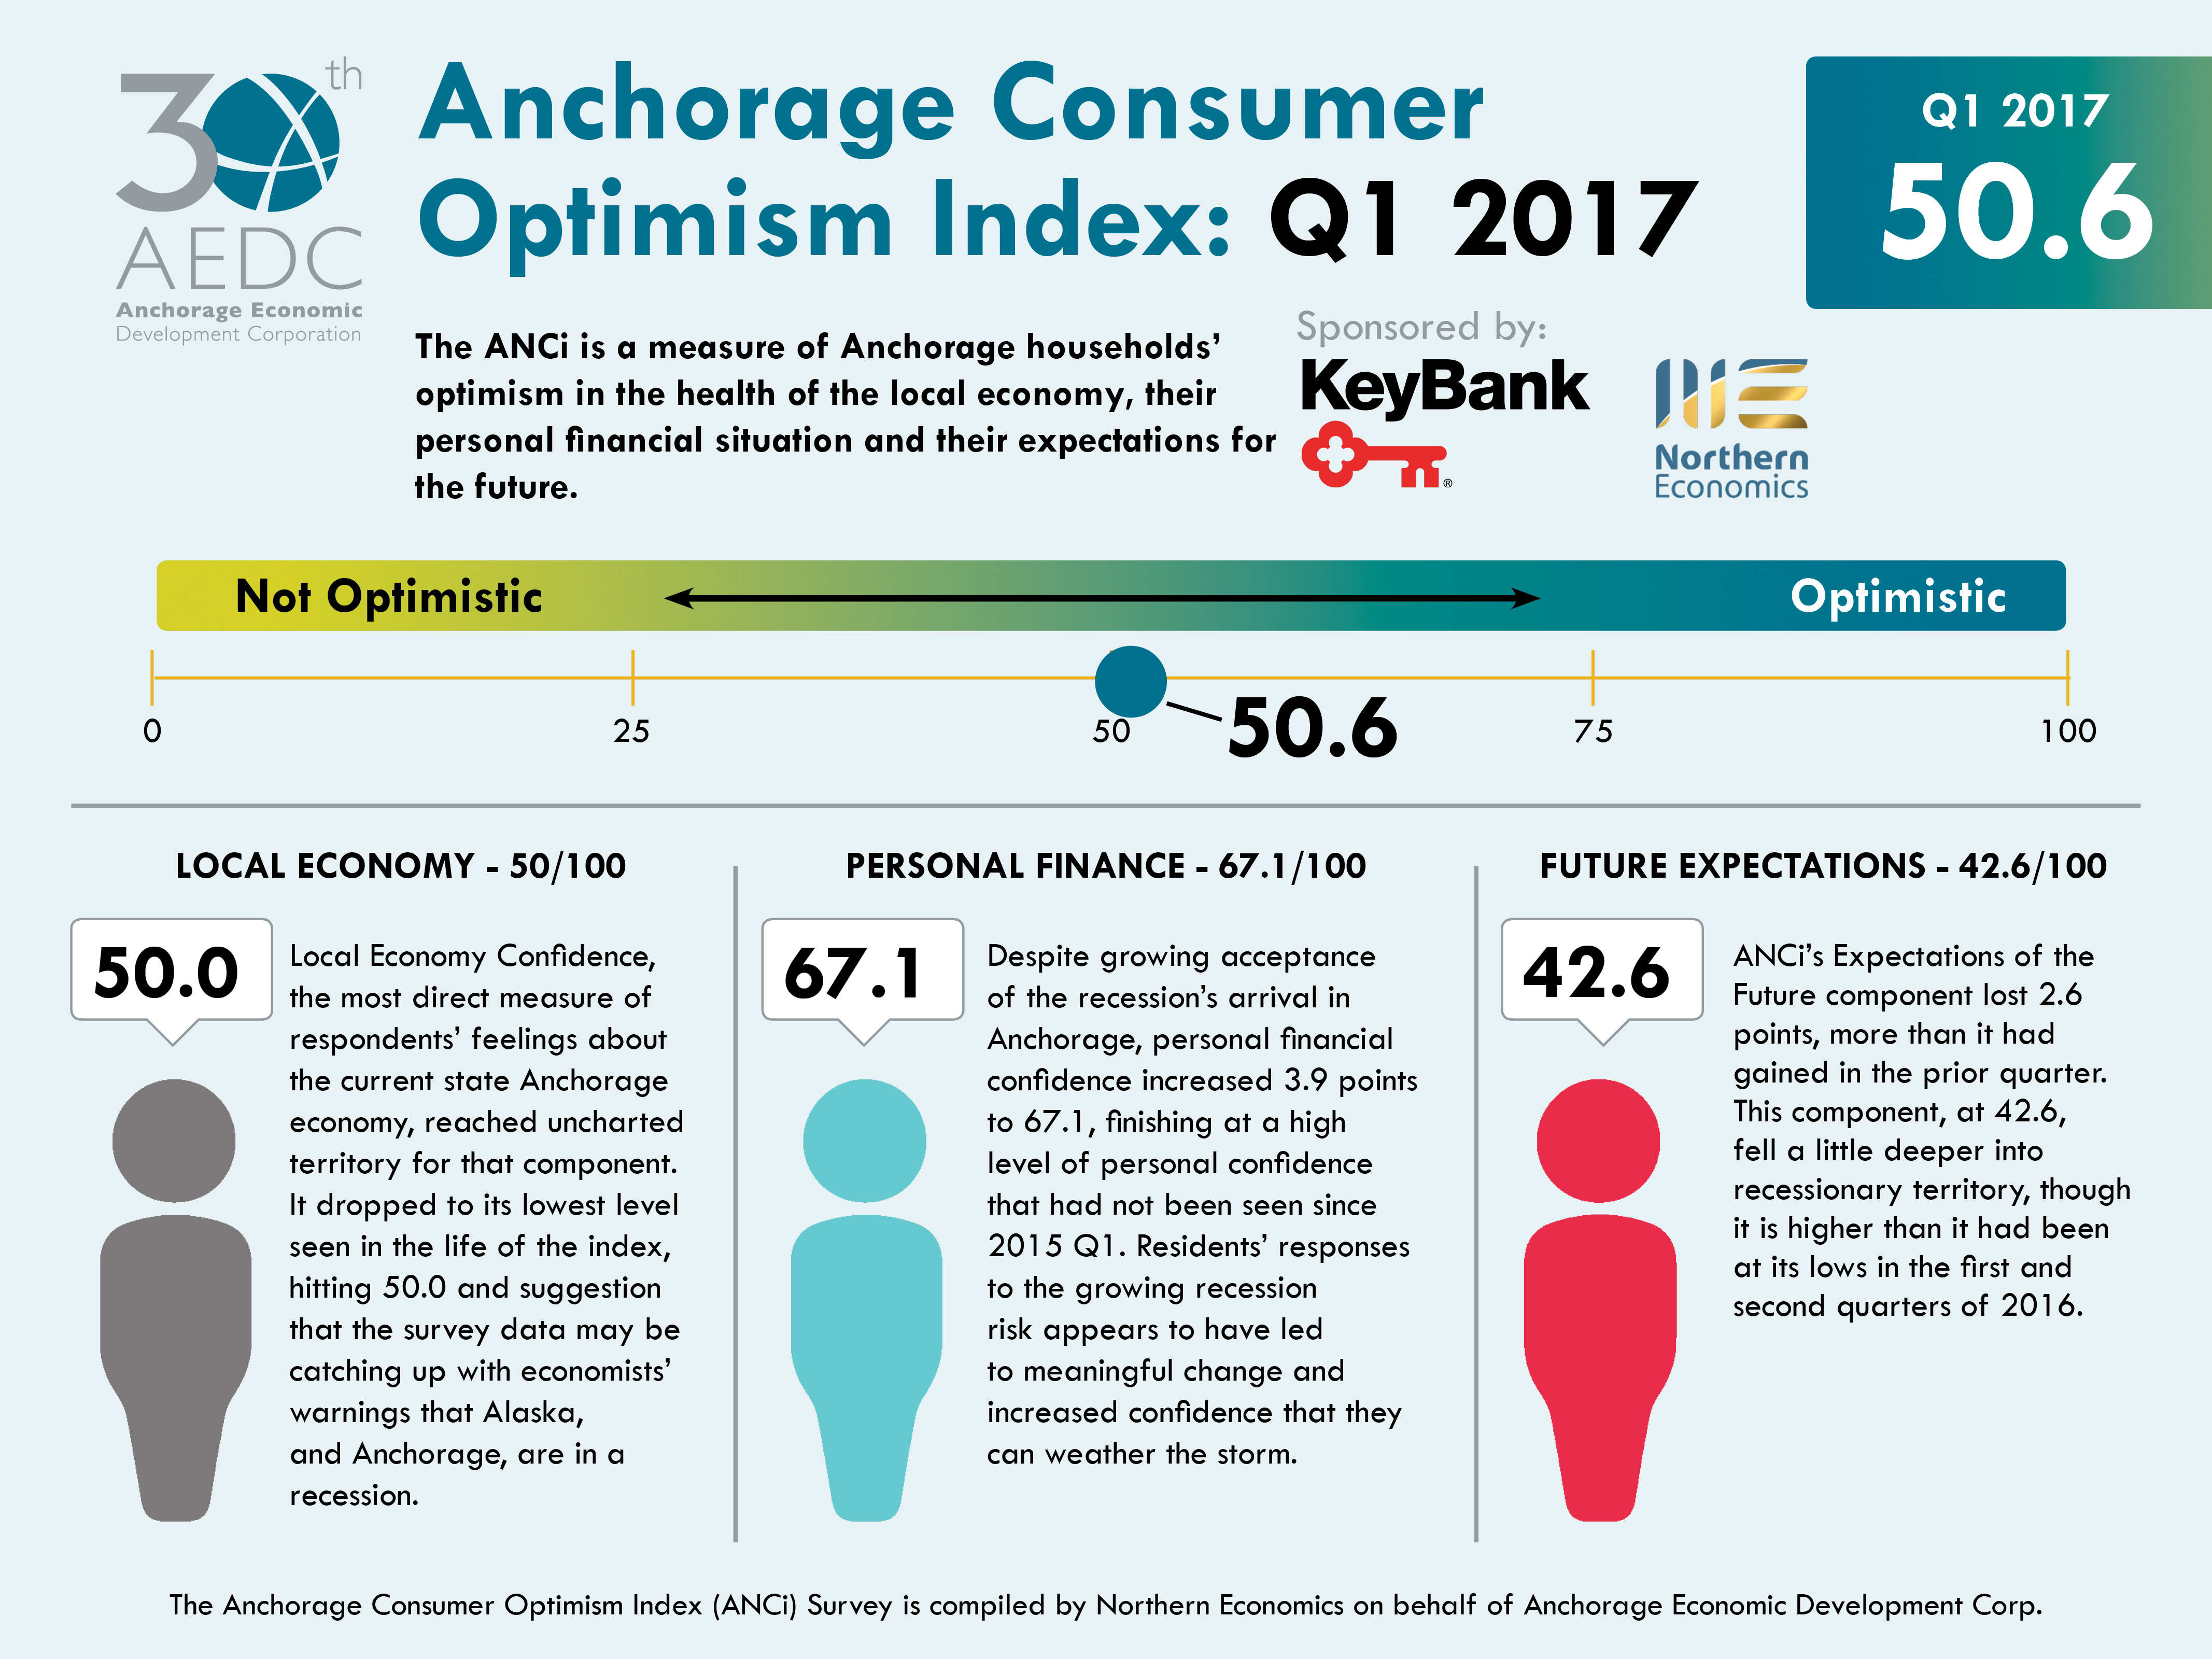 Anchorage Consumer Optimism Index Report Sponsored by KeyBank